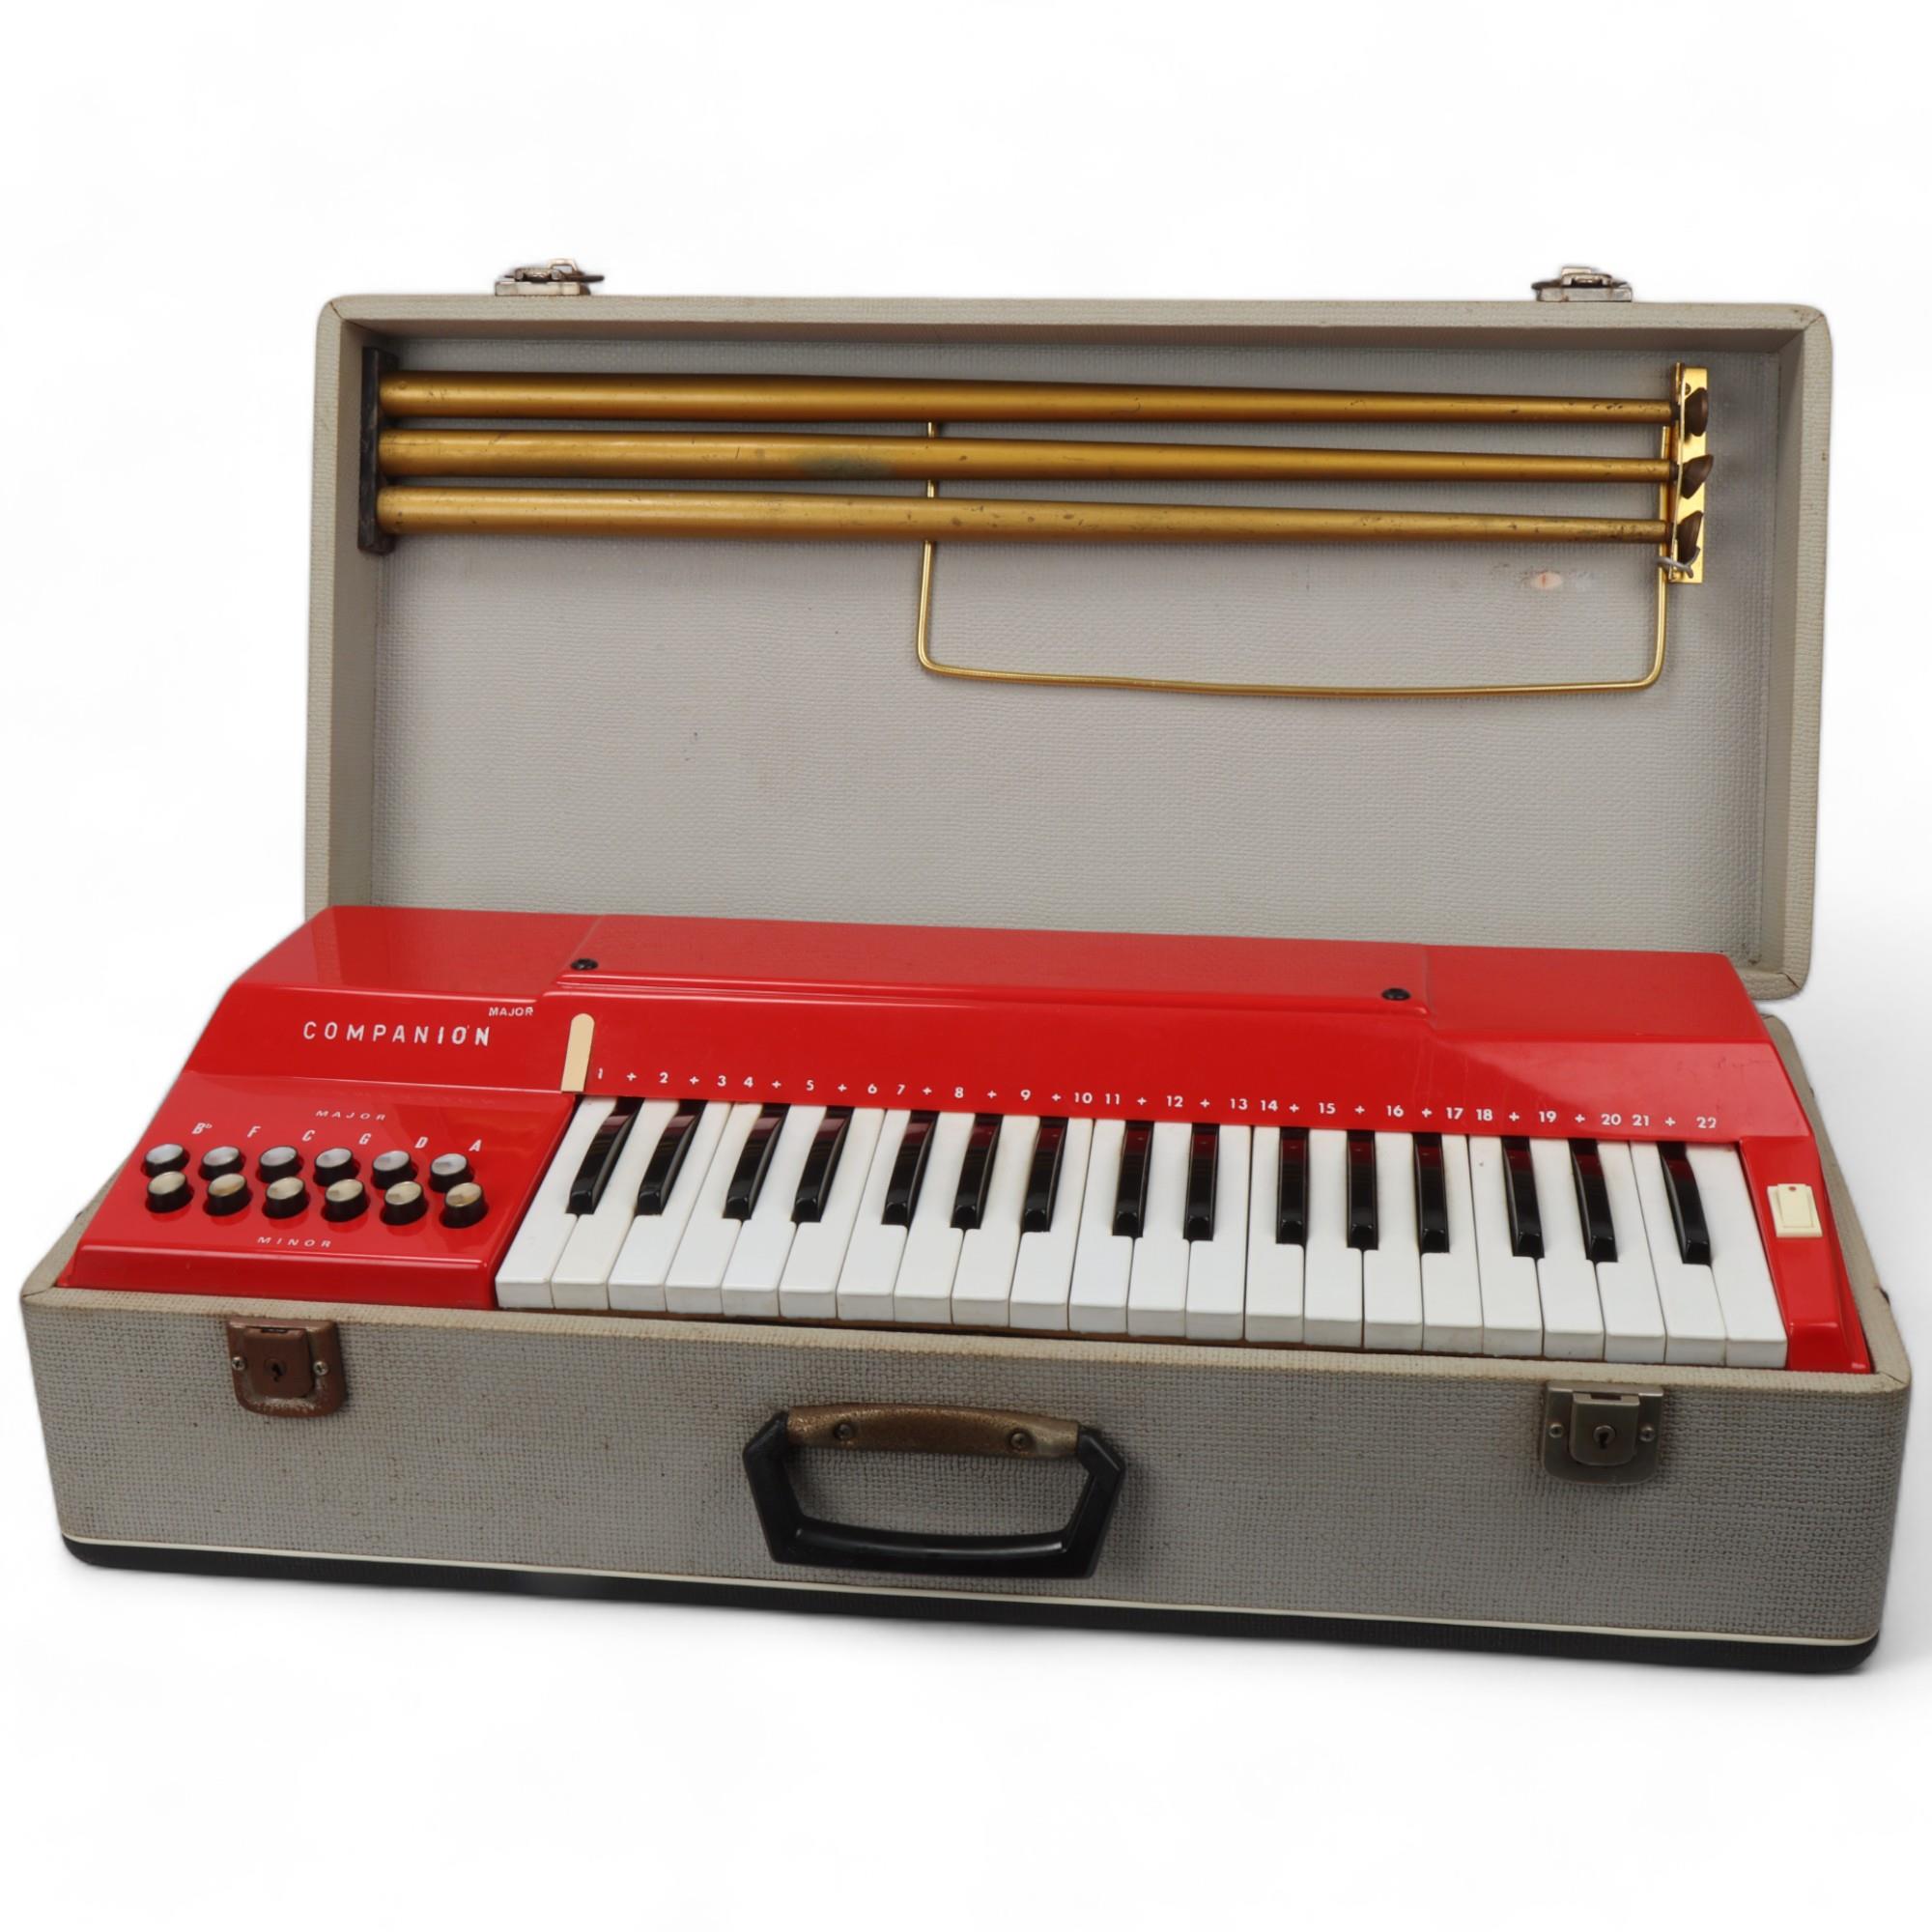 A mid 20th century Italian Companion electric keyboard, red plastic in original fixed carry case and